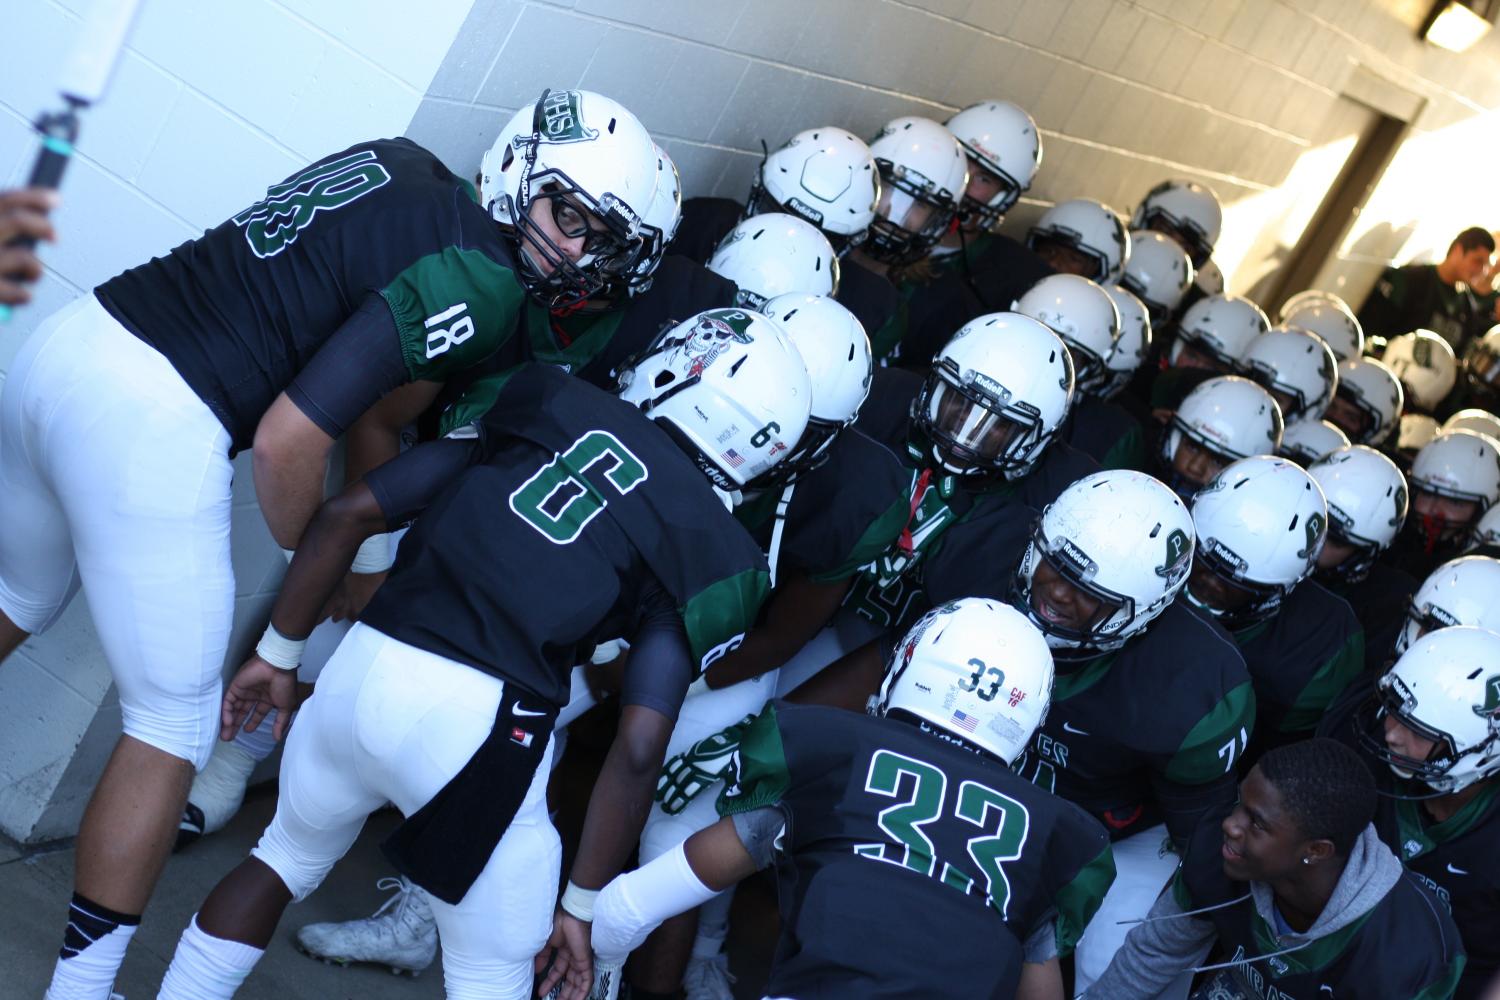 Pattonville football returns to action after canceled game